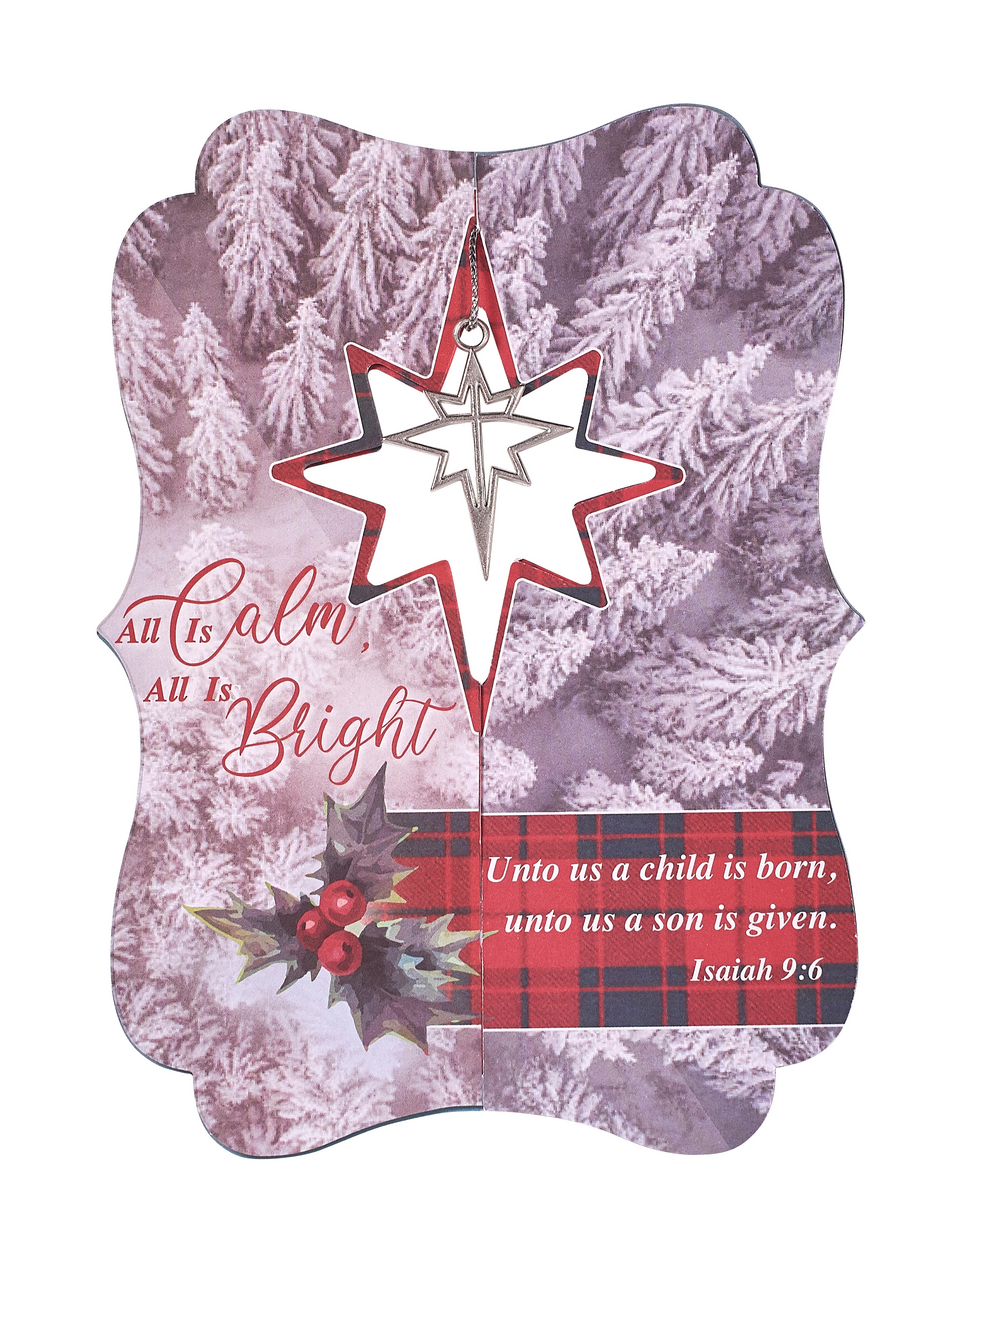 All Is Calm All Is Bright Christian Christmas Card with mini ornament